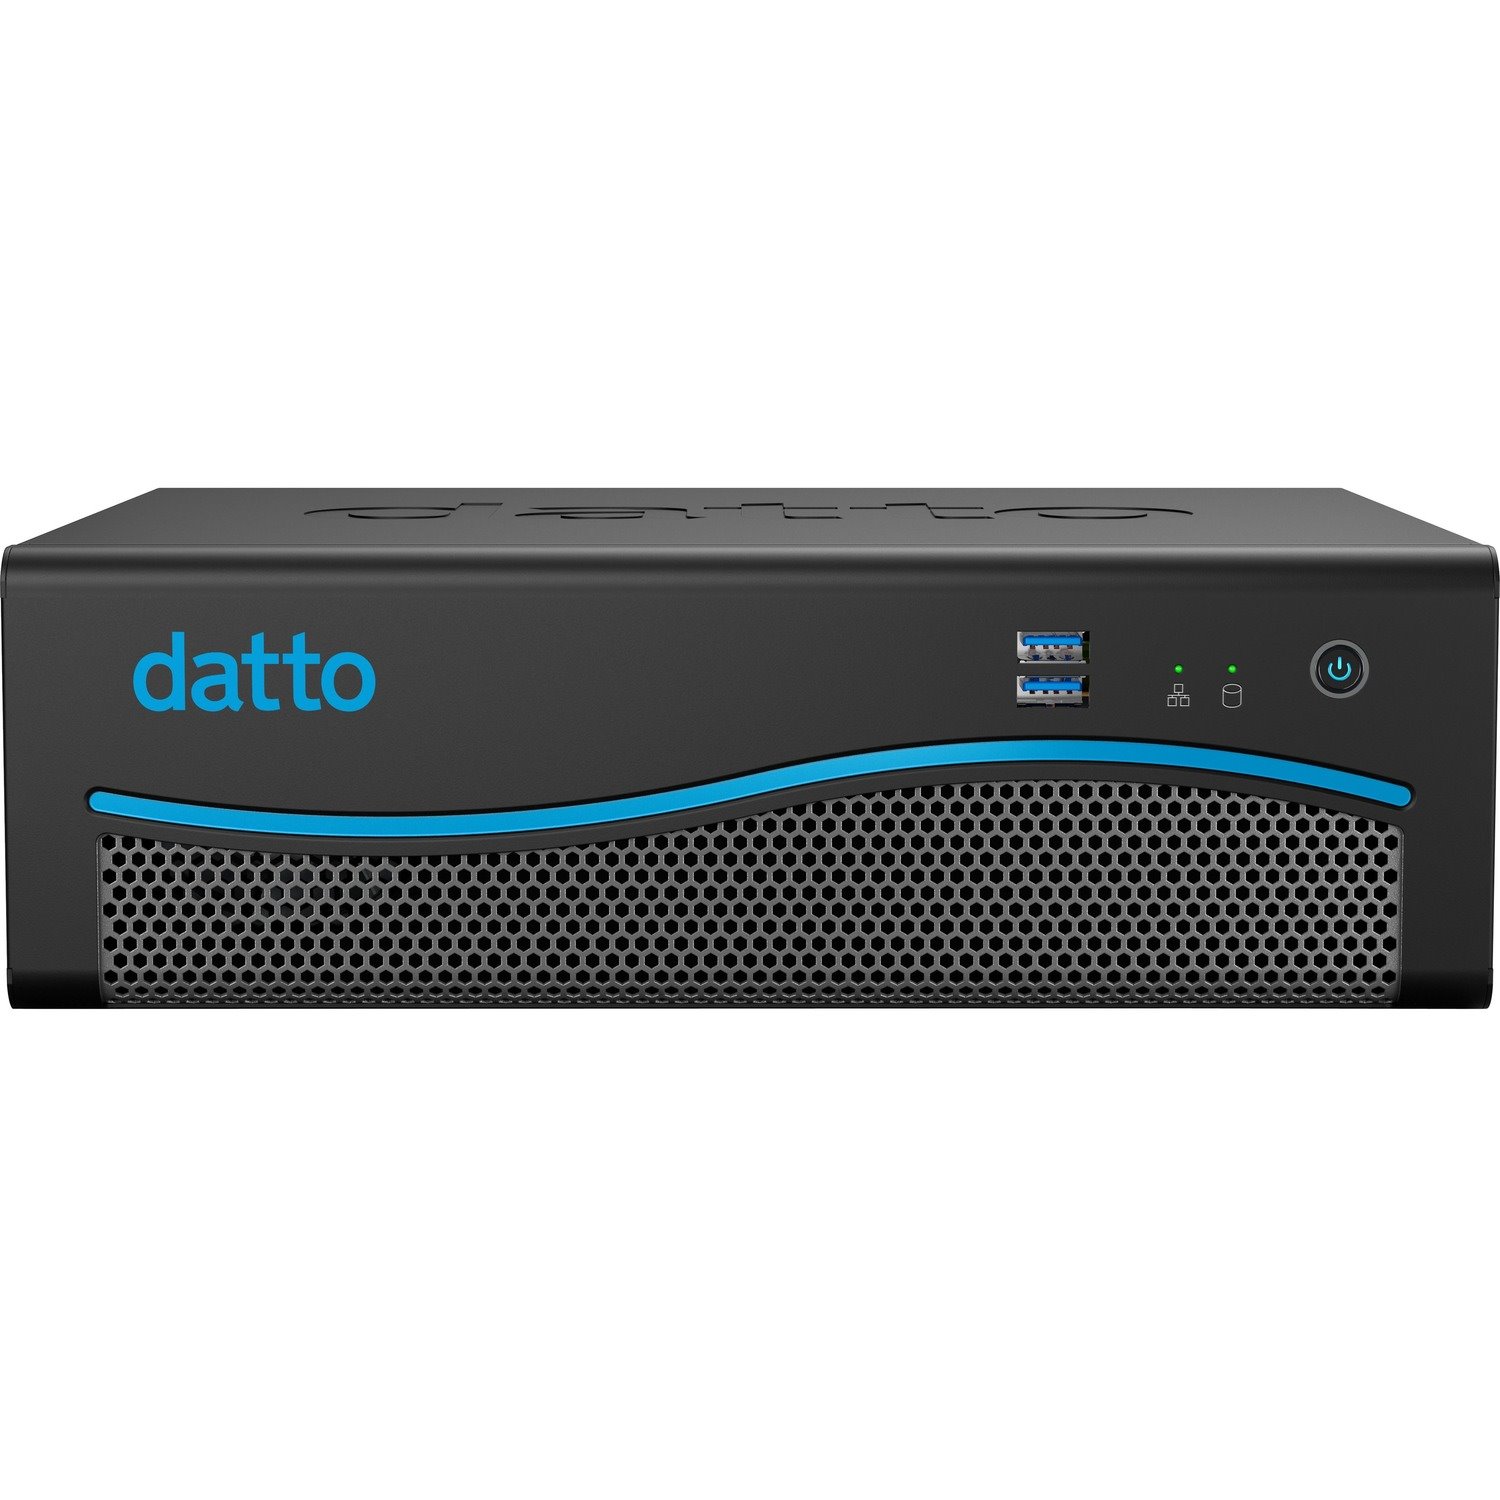 Datto Siris 4 E 24TB Backup, Continuity & Disaster Recovery Appliance (30 Day Trial)